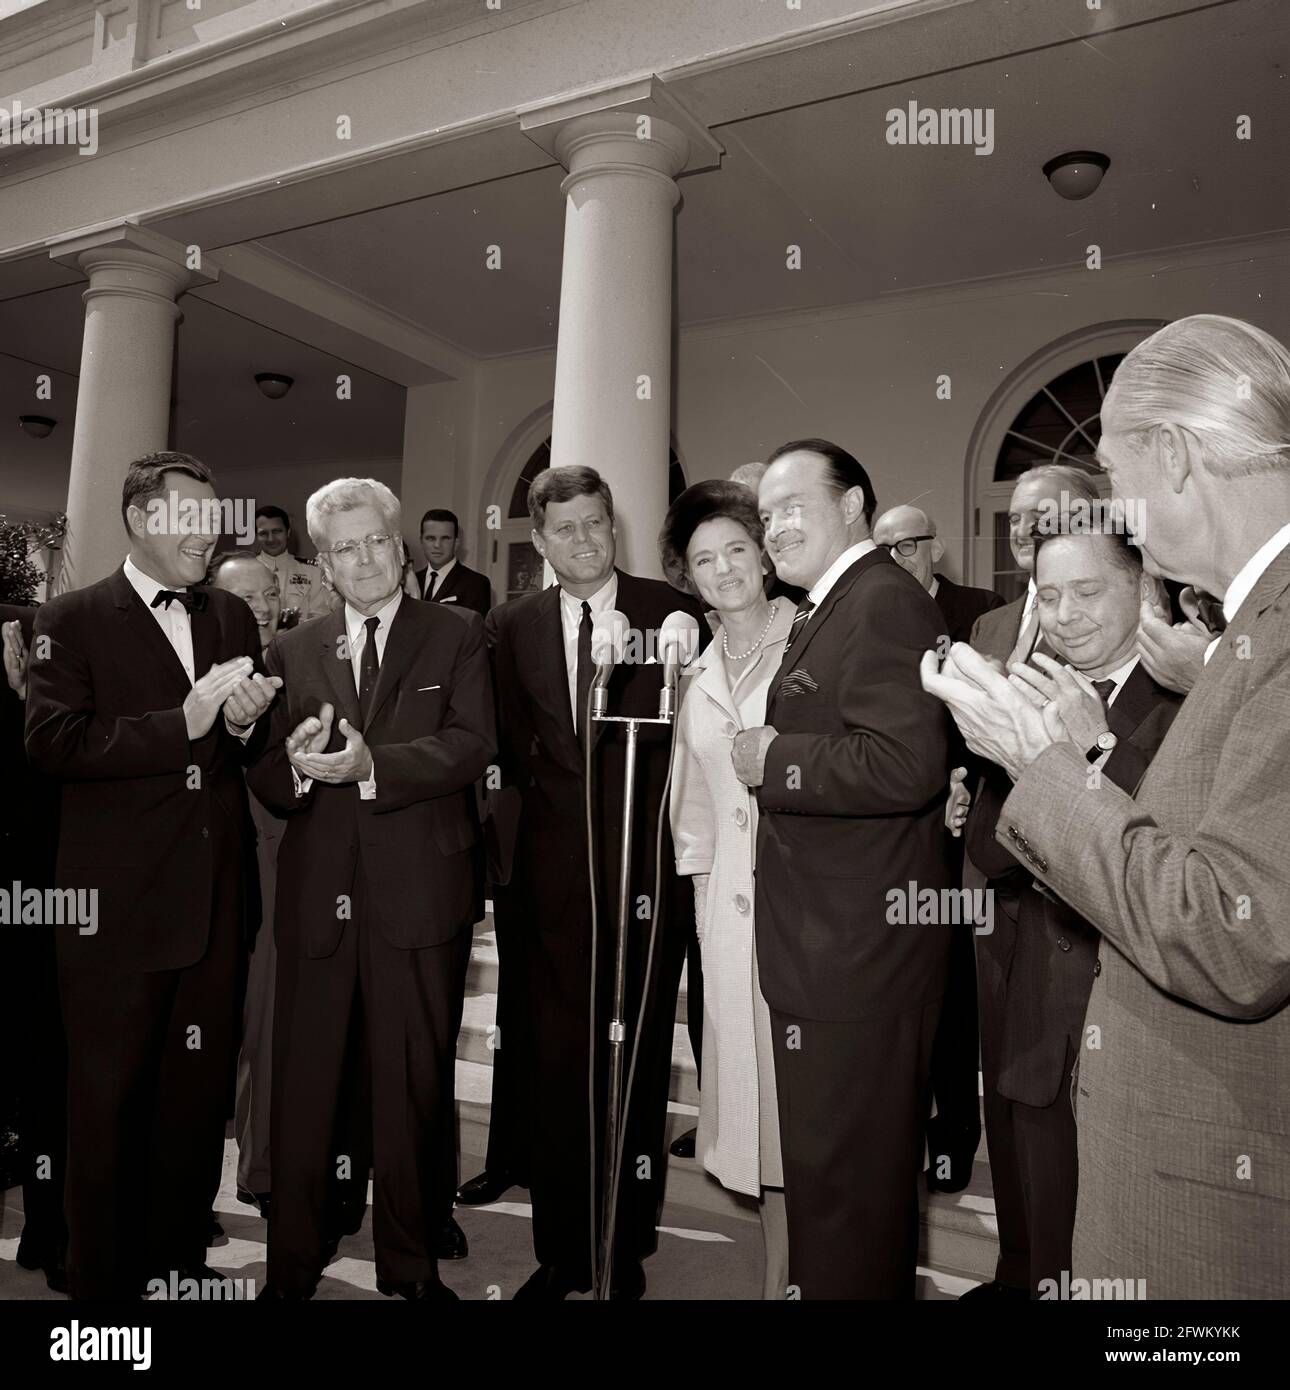 Actor and comedian, Bob Hope, delivers remarks after receiving the Congressional Gold Medal, presented by President John F. Kennedy in recognition of his services to the country as an entertainer during World War II. Left to right: unidentified; Representative Michael A. Feighan (Ohio); President Kennedy; Mr. Hope’s wife, Dolores Hope; Mr. Hope; unidentified (behind Mr. Hope); Senator Stuart Symington (Missouri); Representative Carl Albert (Oklahoma); Representative Leslie C. Arends (Illinois). Also pictured (standing at left, in background): Naval Aide to the President, Captain Shepard. Stock Photo